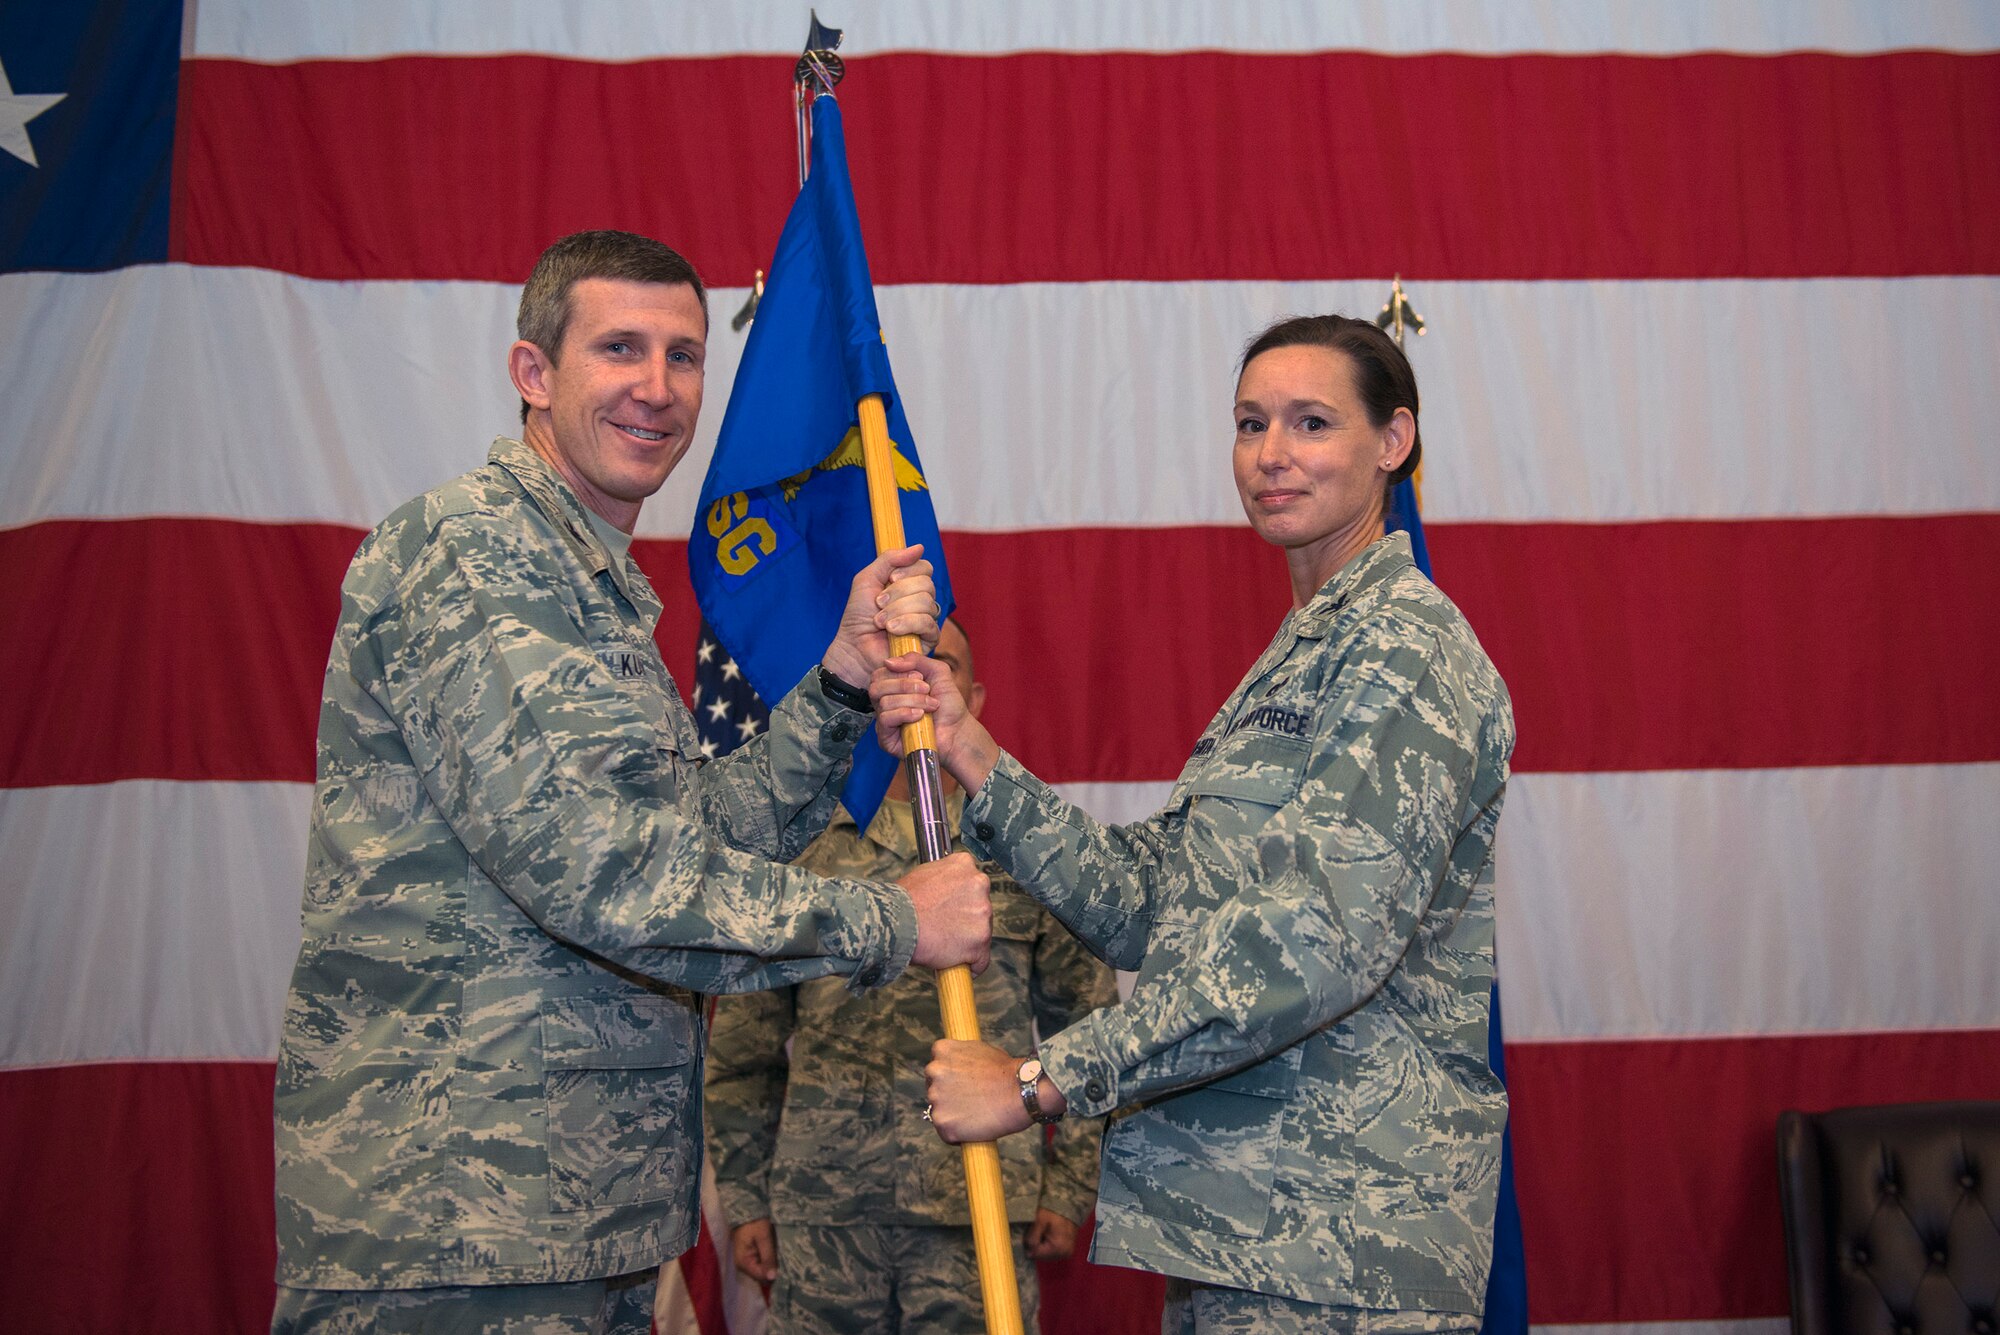 U.S. Air Force Col. Thomas Kunkel, 23d Wing commander, presents Col. Susan Riordan-Smith, 23d Mission Support Group commander, with the 23d MSG guidon during a change of command ceremony, June 21, 2016, at Moody Air Force Base, Ga. Riordan-Smith previously served as the deputy director of environmental management directorate at the Air Force Civil Engineer Center at Joint Base San-Antonio Lackland AFB, Texas. (U.S. Air Force photo by Airman 1st Class Greg Nash/Released)